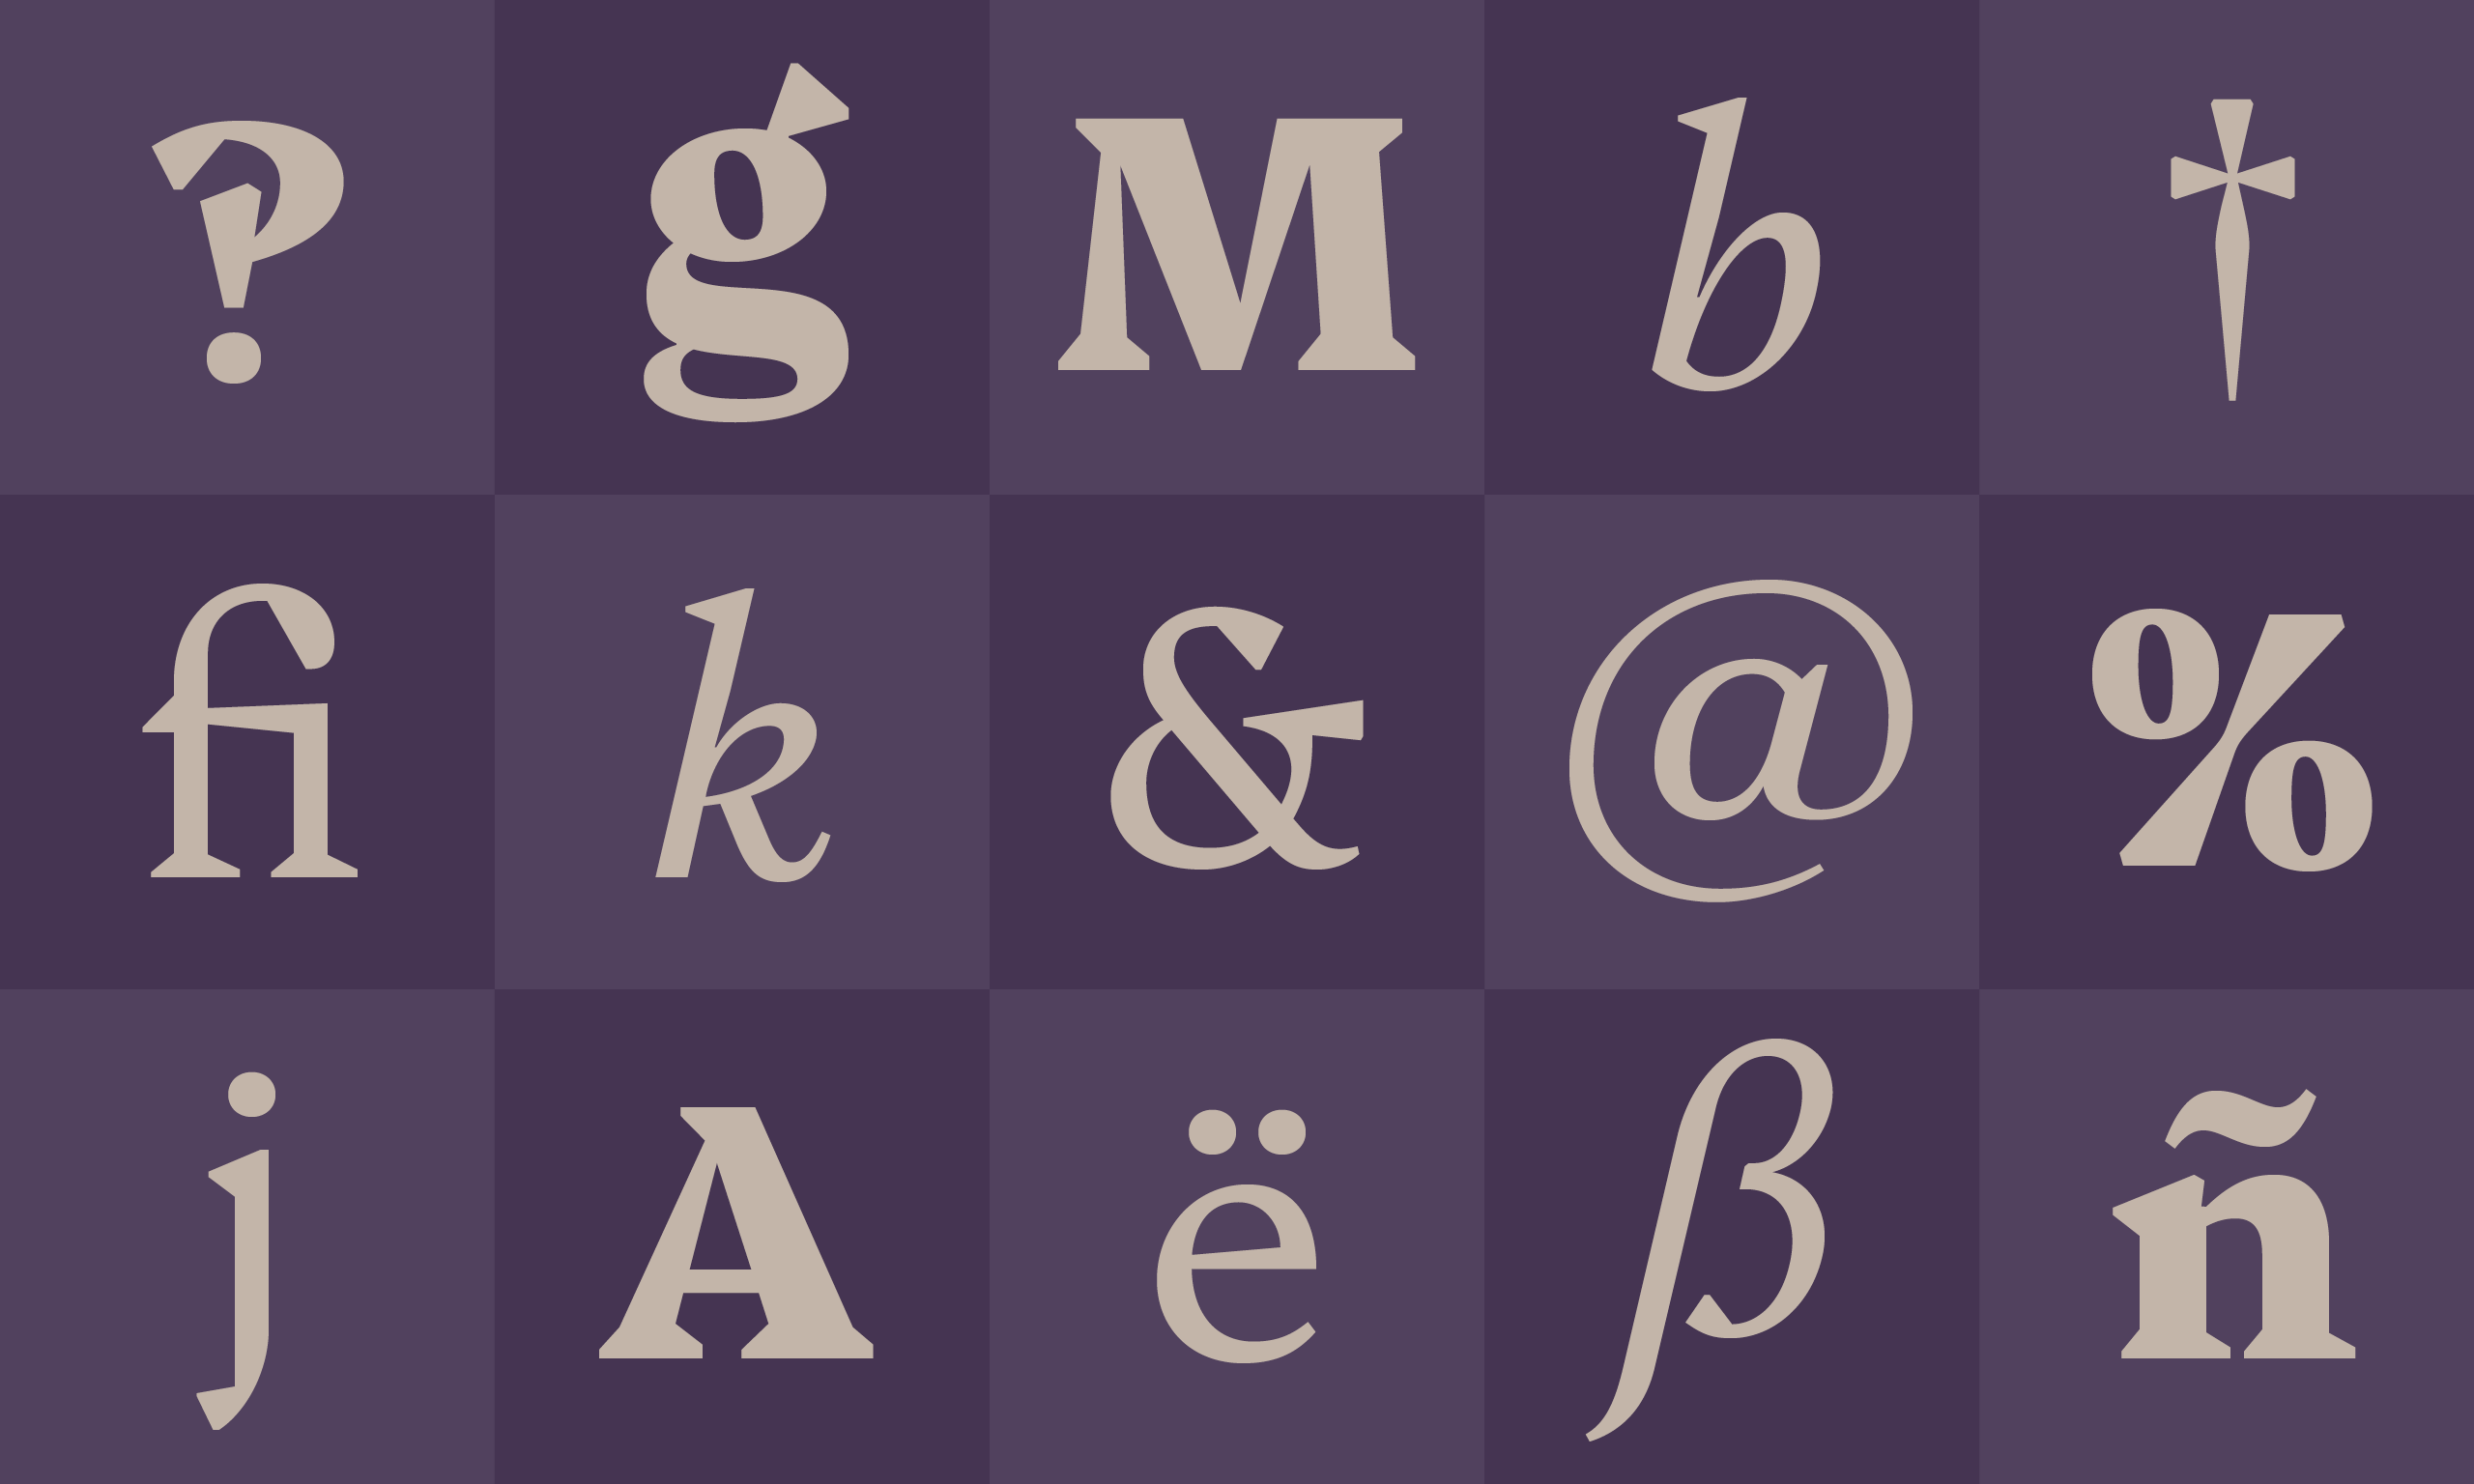 A selection of glyphs arranged in a checkerboard style